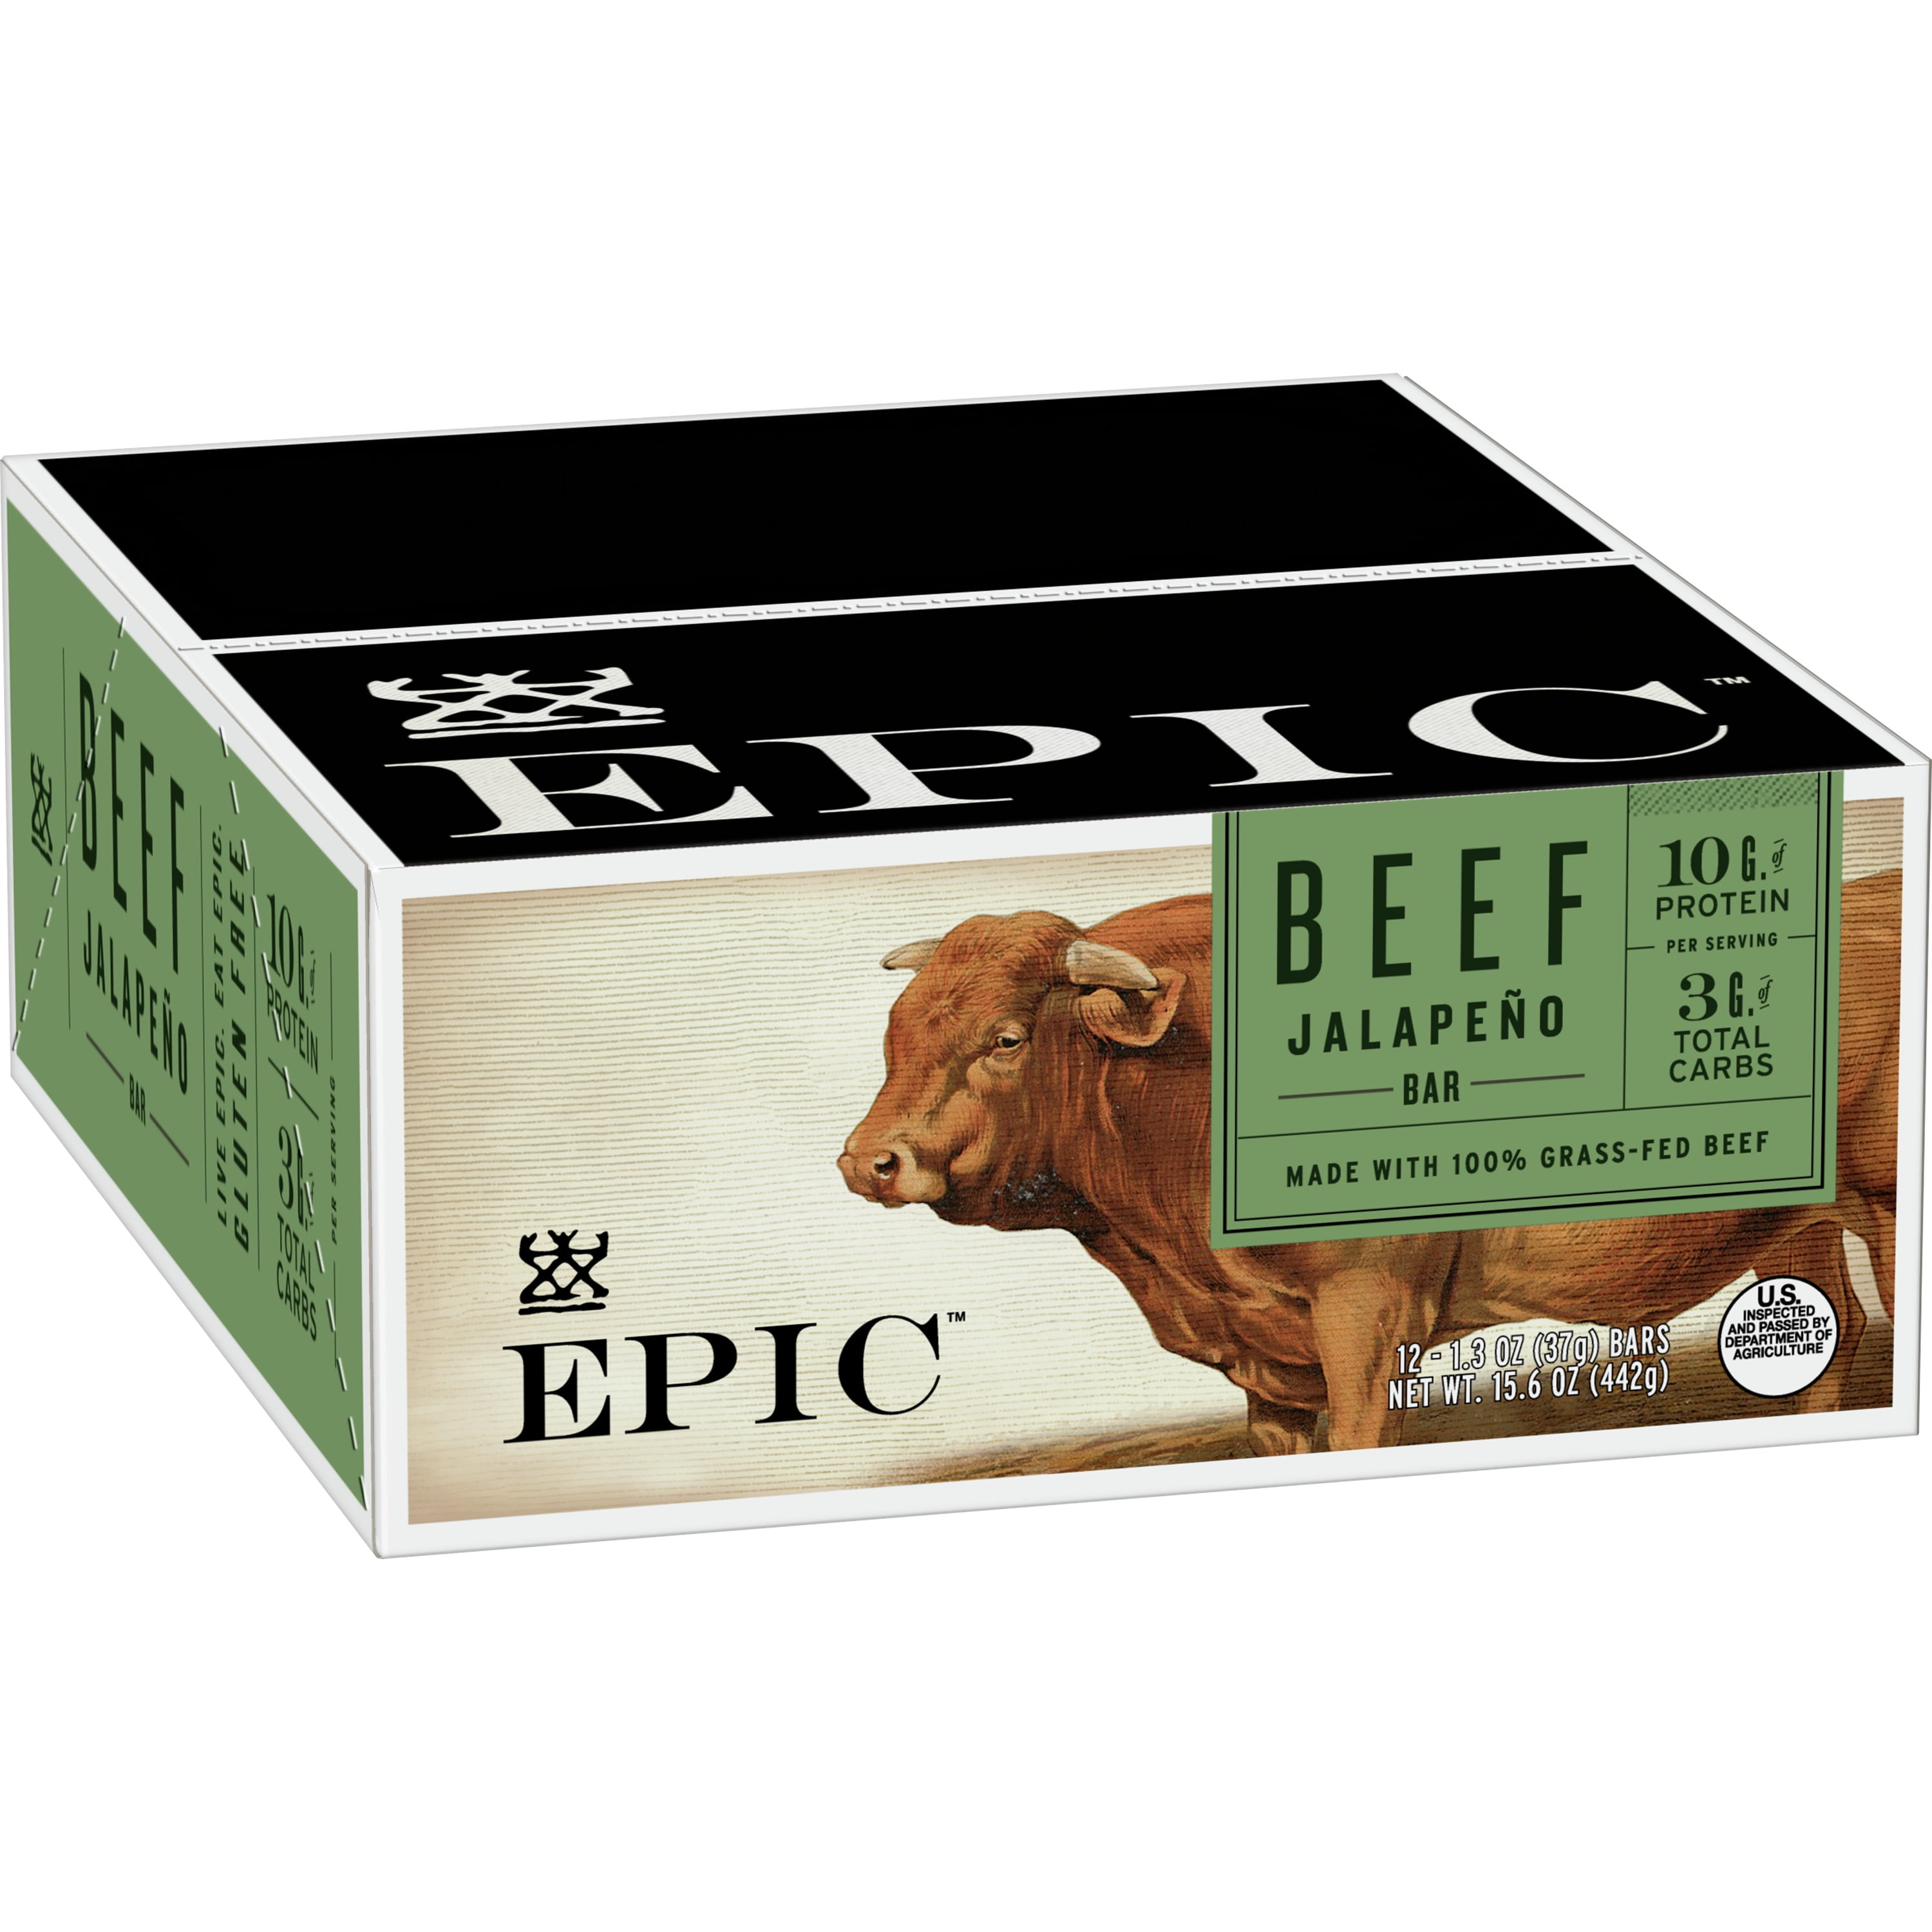 EPIC Protein Bars, Beef JalapeÃ±o, Keto and Paleo Friendly, 1.3 oz, 12 ct